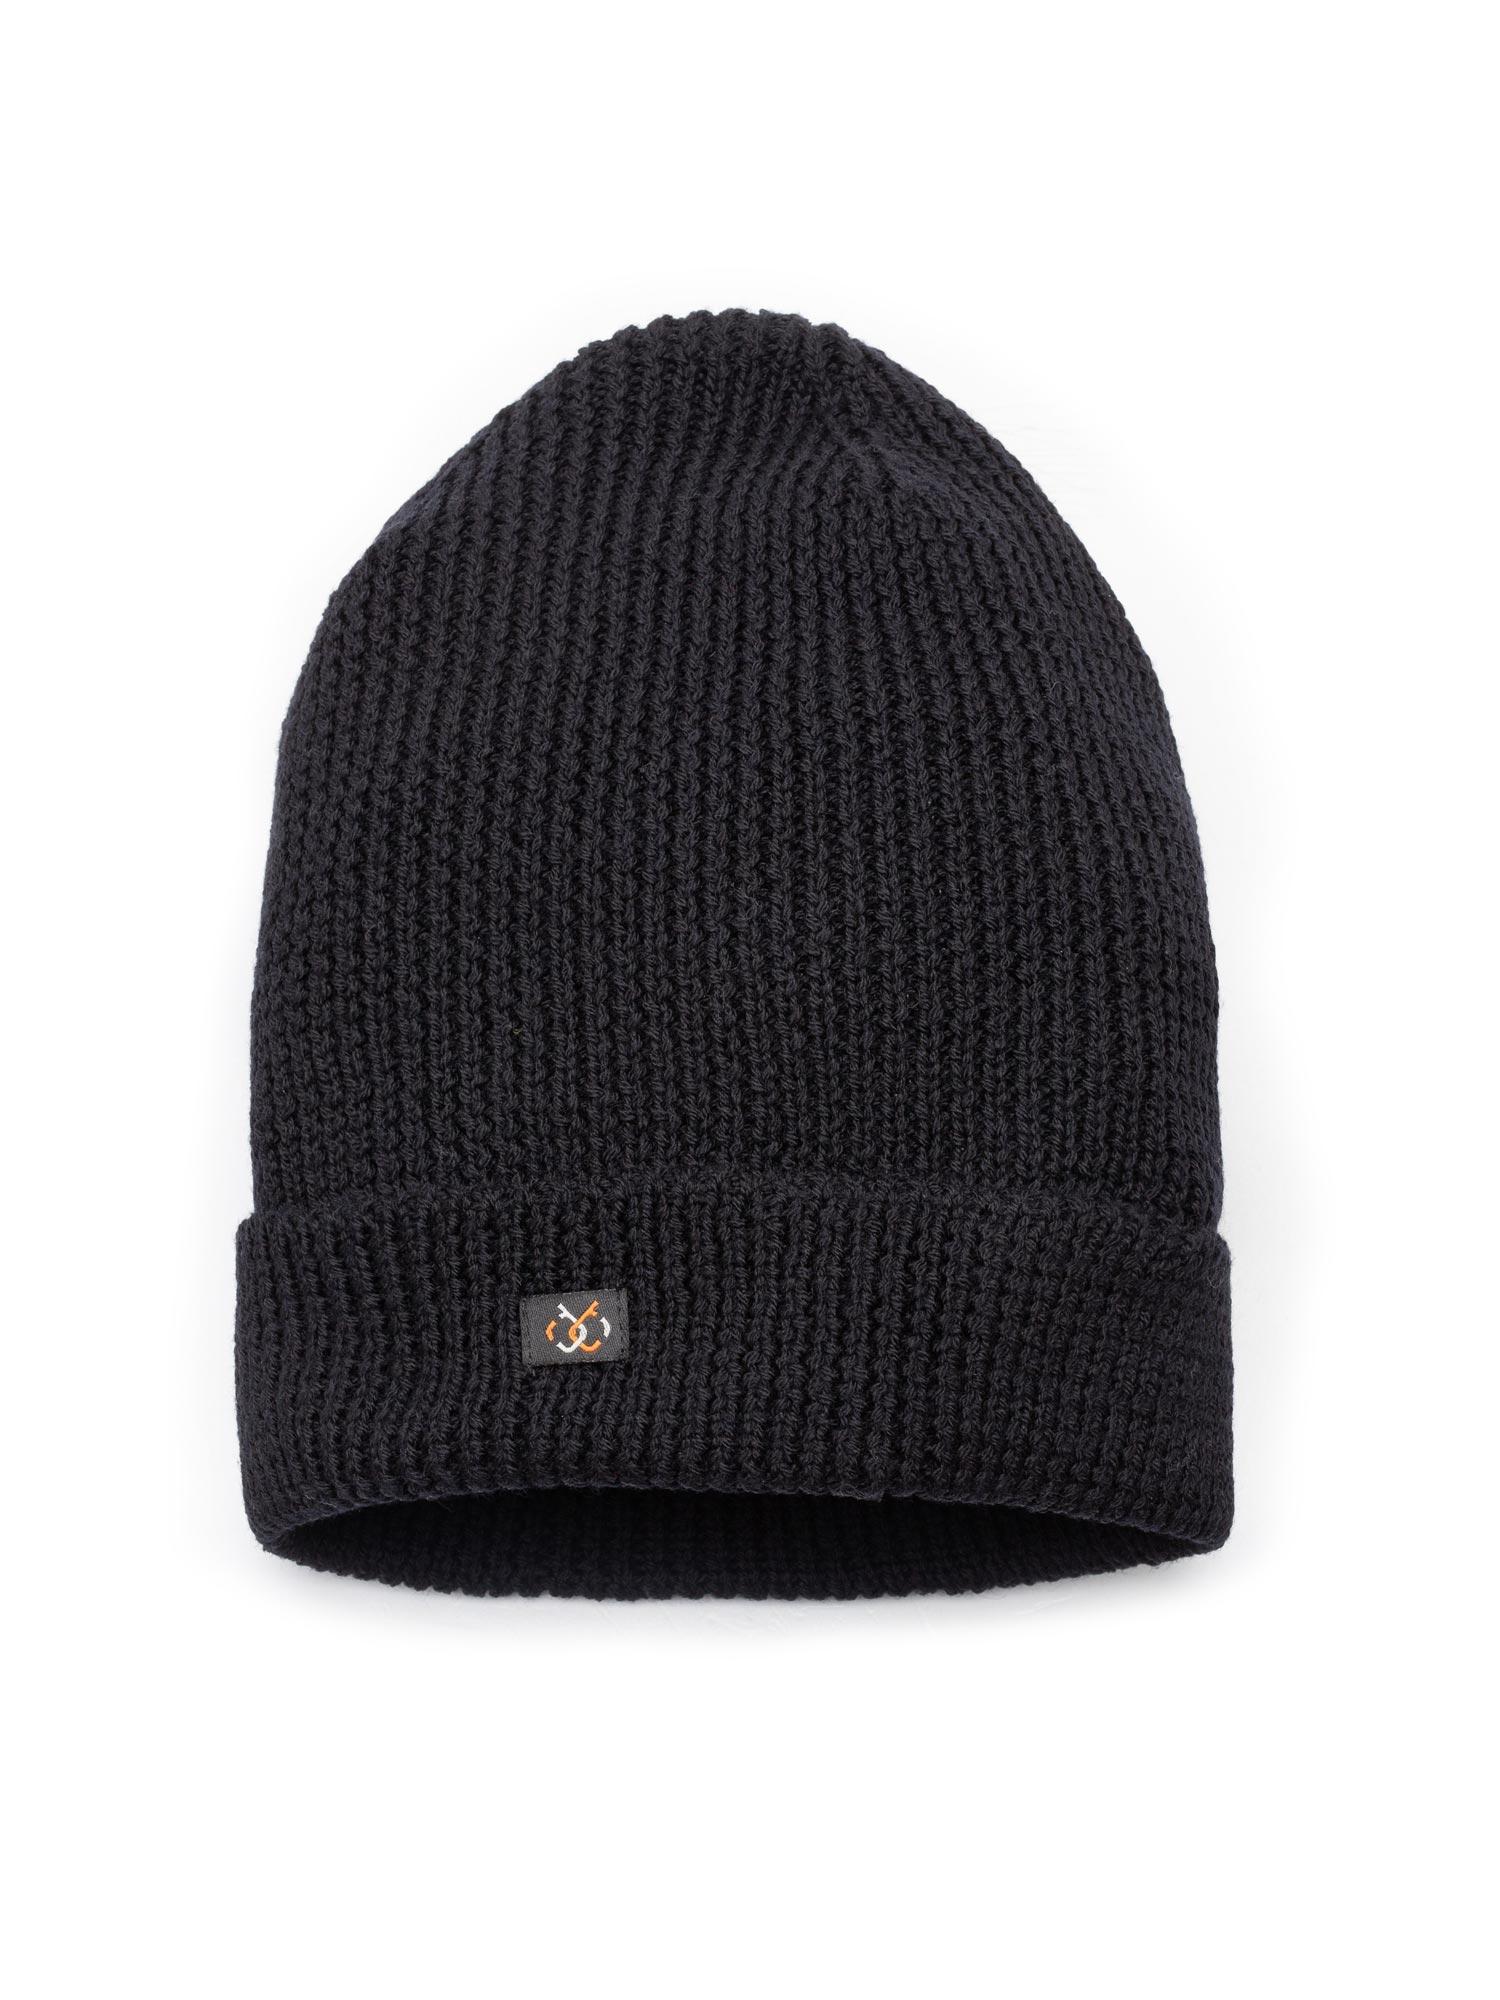 Selected image for BRILLE Kapa  Merino Beanie crna